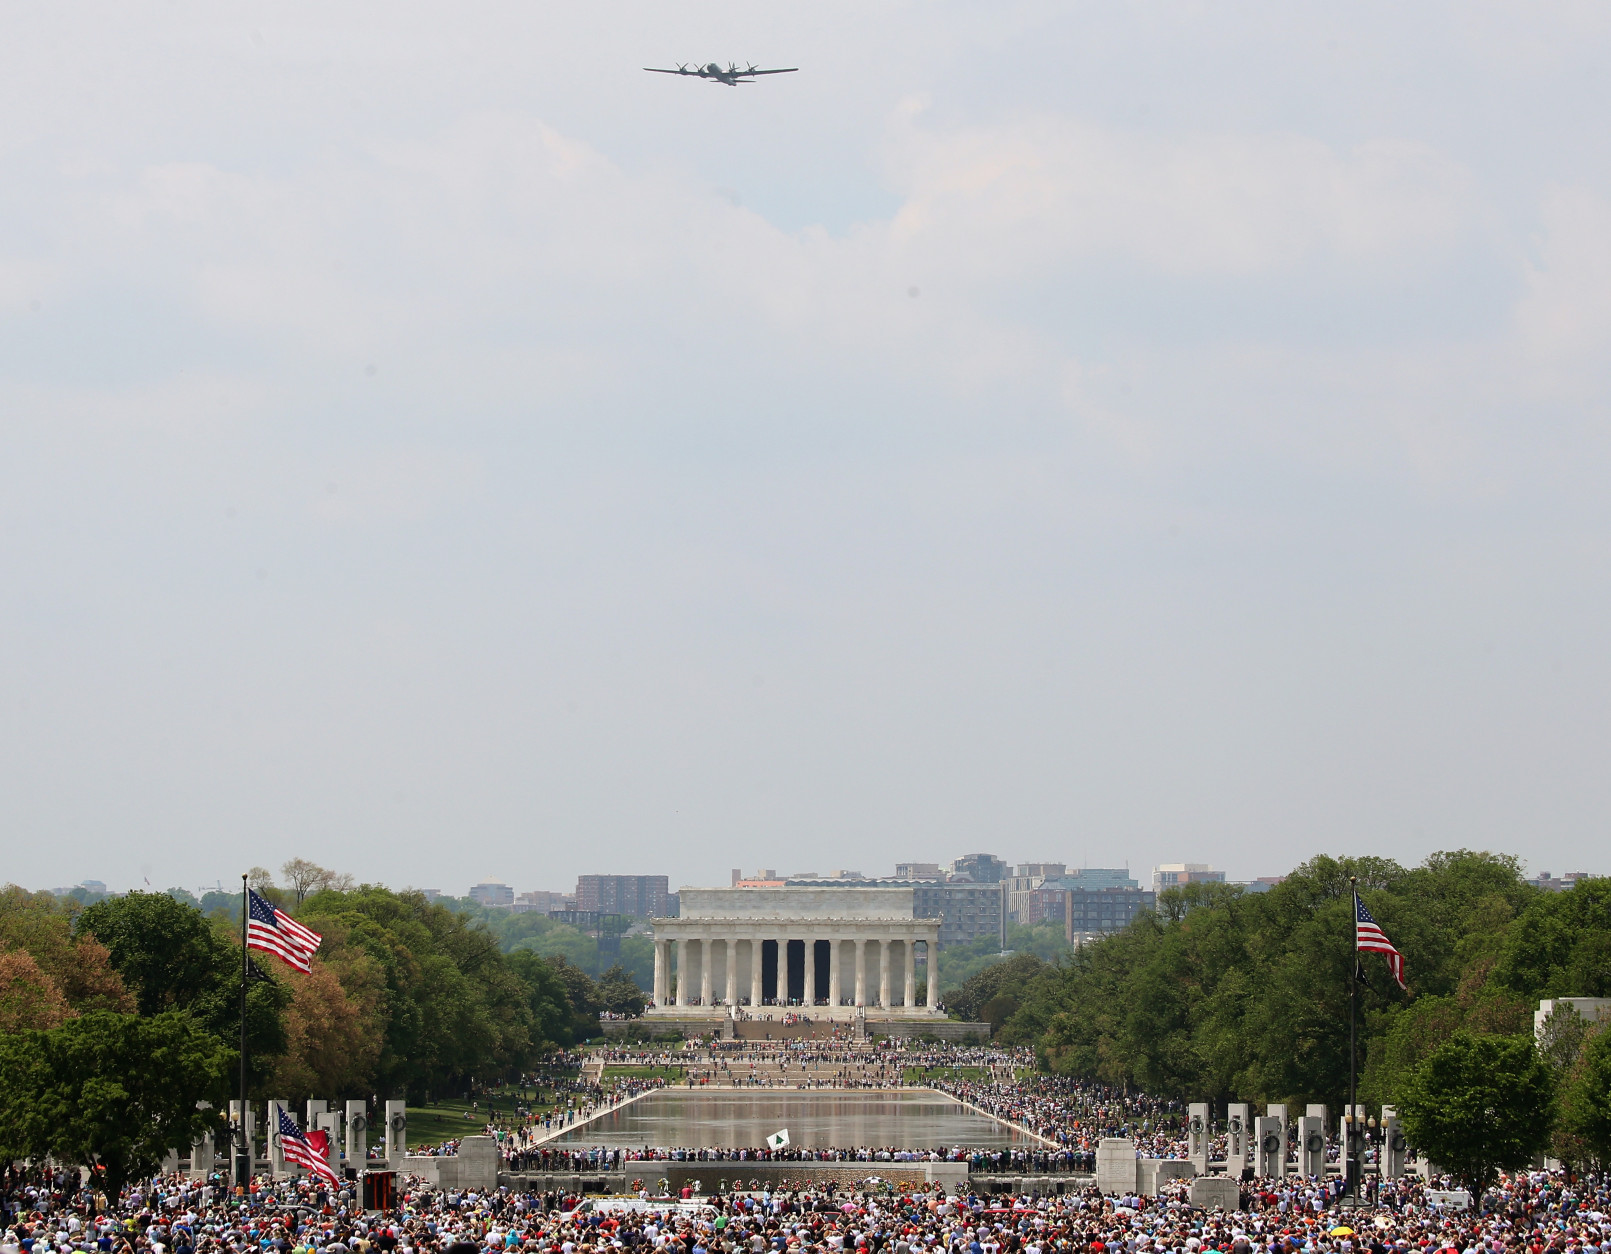 WASHINGTON, DC - MAY 08: A vintage World War II B29 bomber flies over the Lincoln and WWII Memorials May 8, 2015 in Washington, DC. Fifty six vintage war planes took part in a flyover at the WWII memorial for the 70th anniversary Victory in Europe celebration. (Photo by Mark Wilson/Getty Images)